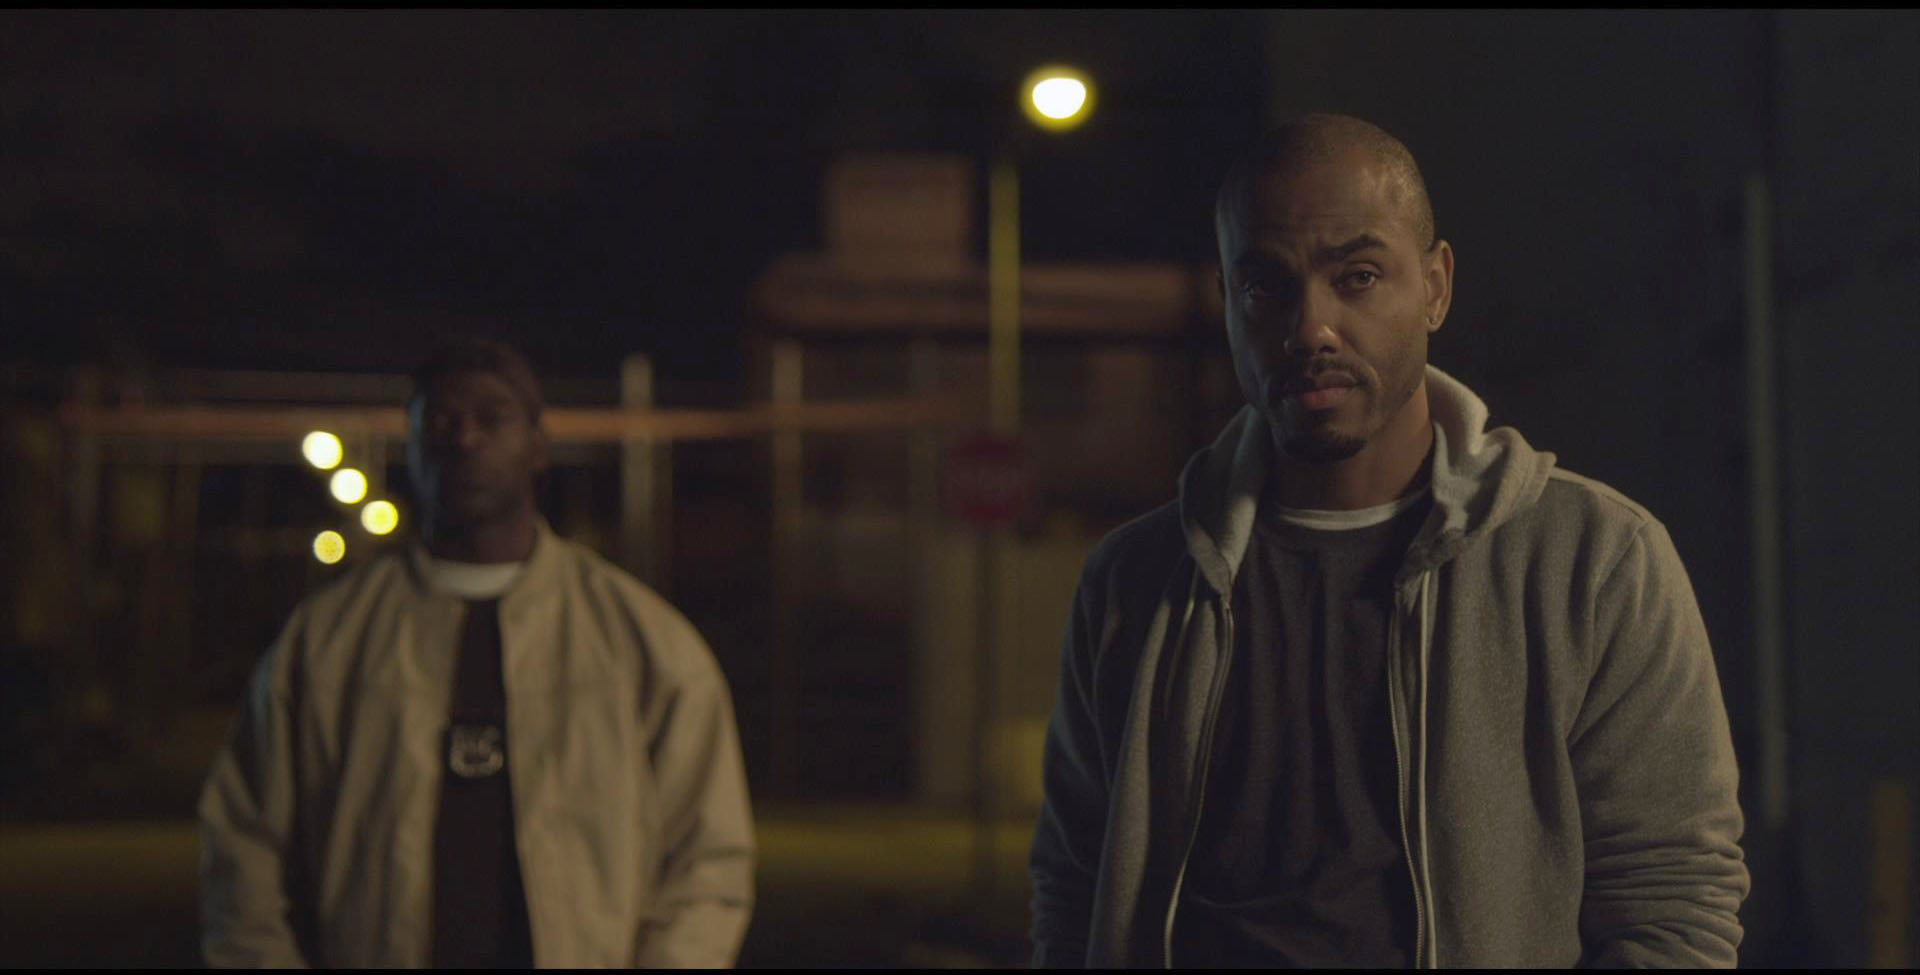 A still from 'Frisk' a film by Tahir Jeter.